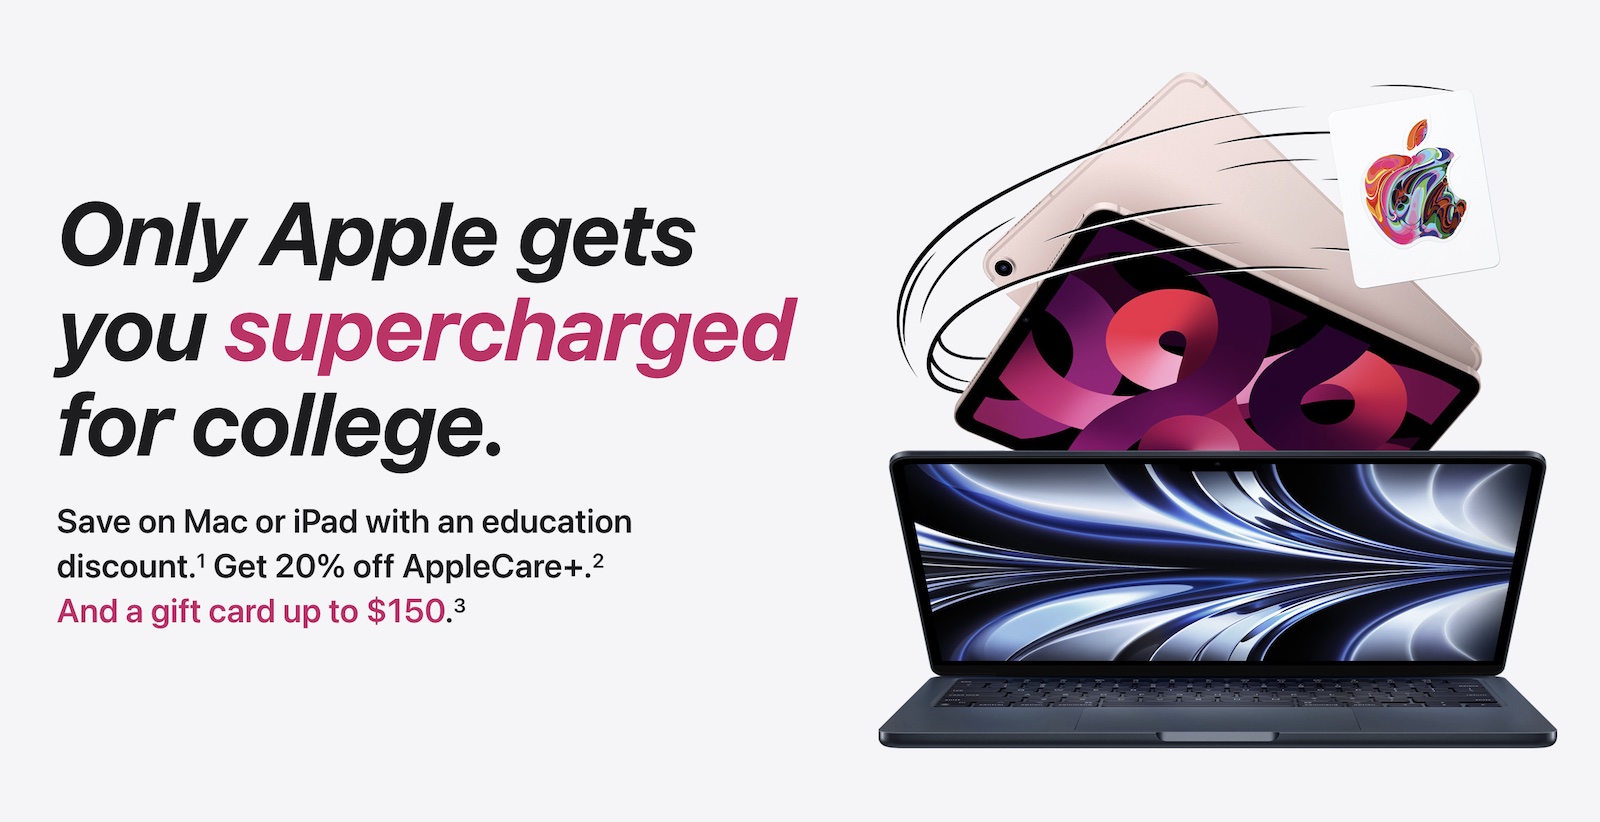 Apple Launches 2022 Back to School Offer: Up to $150 Gift Card With Mac or iPad